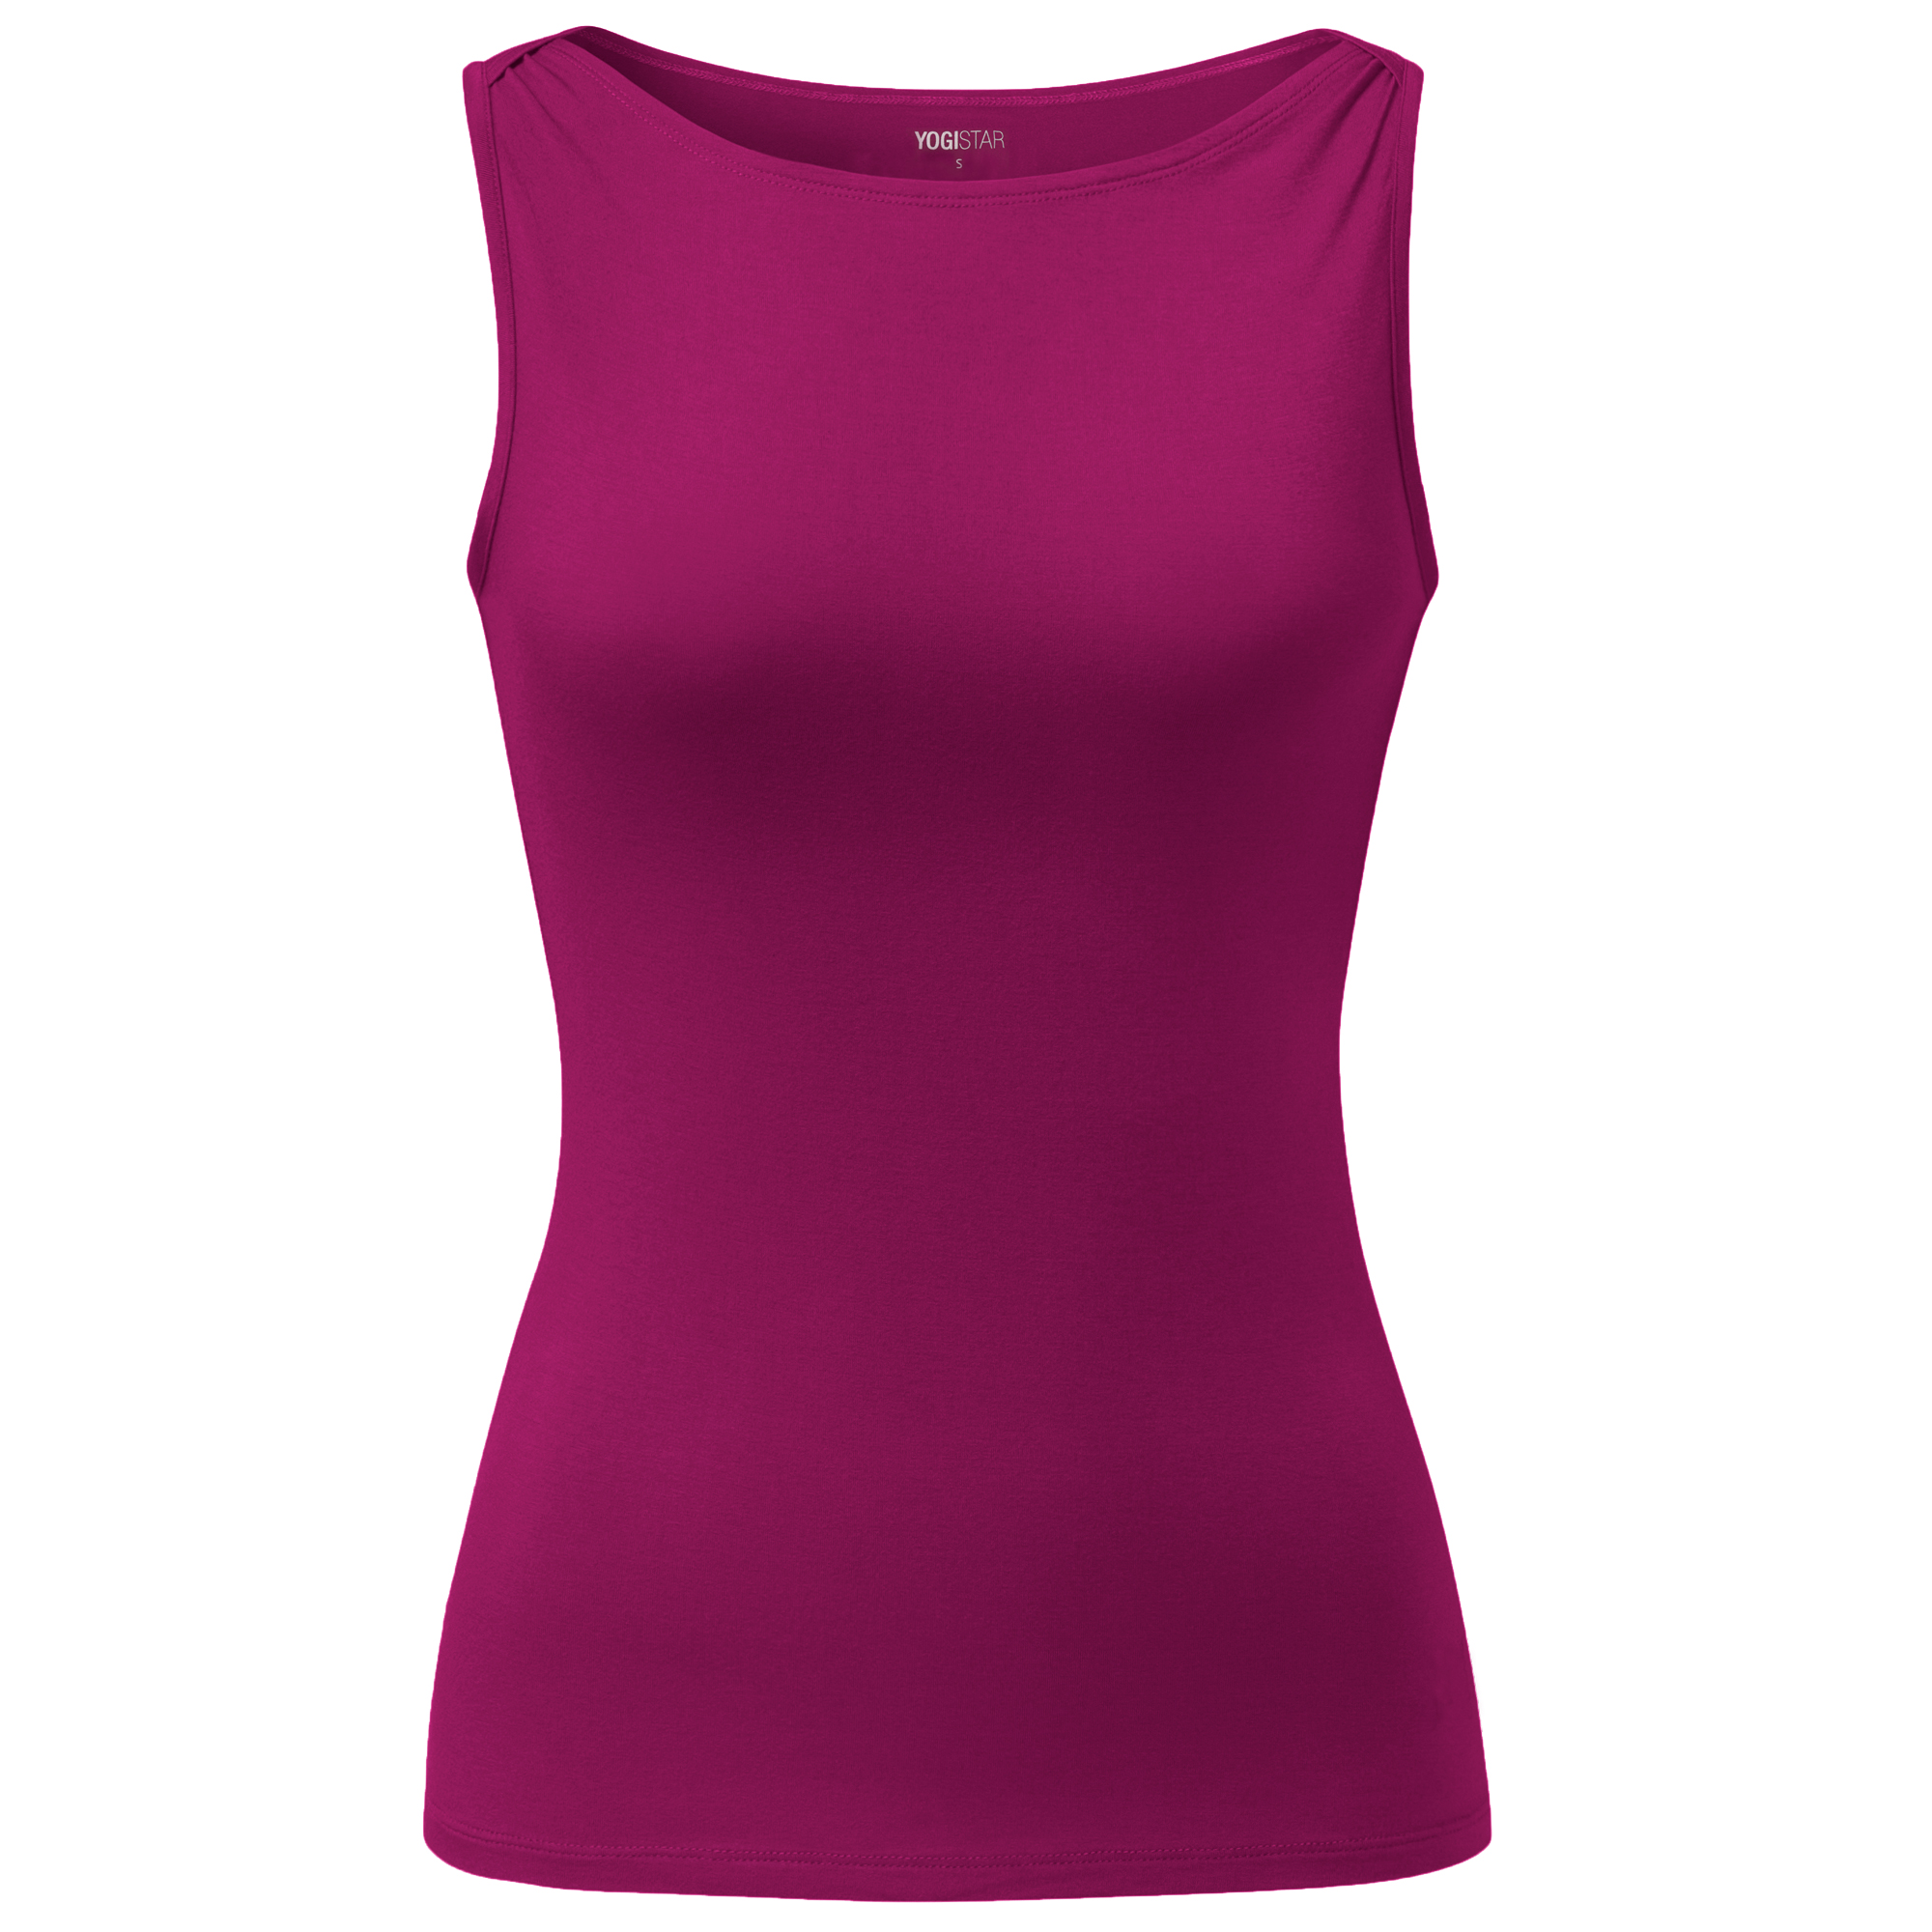 https://www.yogishop.com/out/pictures/master/product/1/yoga_boatneck_ala_raspberry.jpg